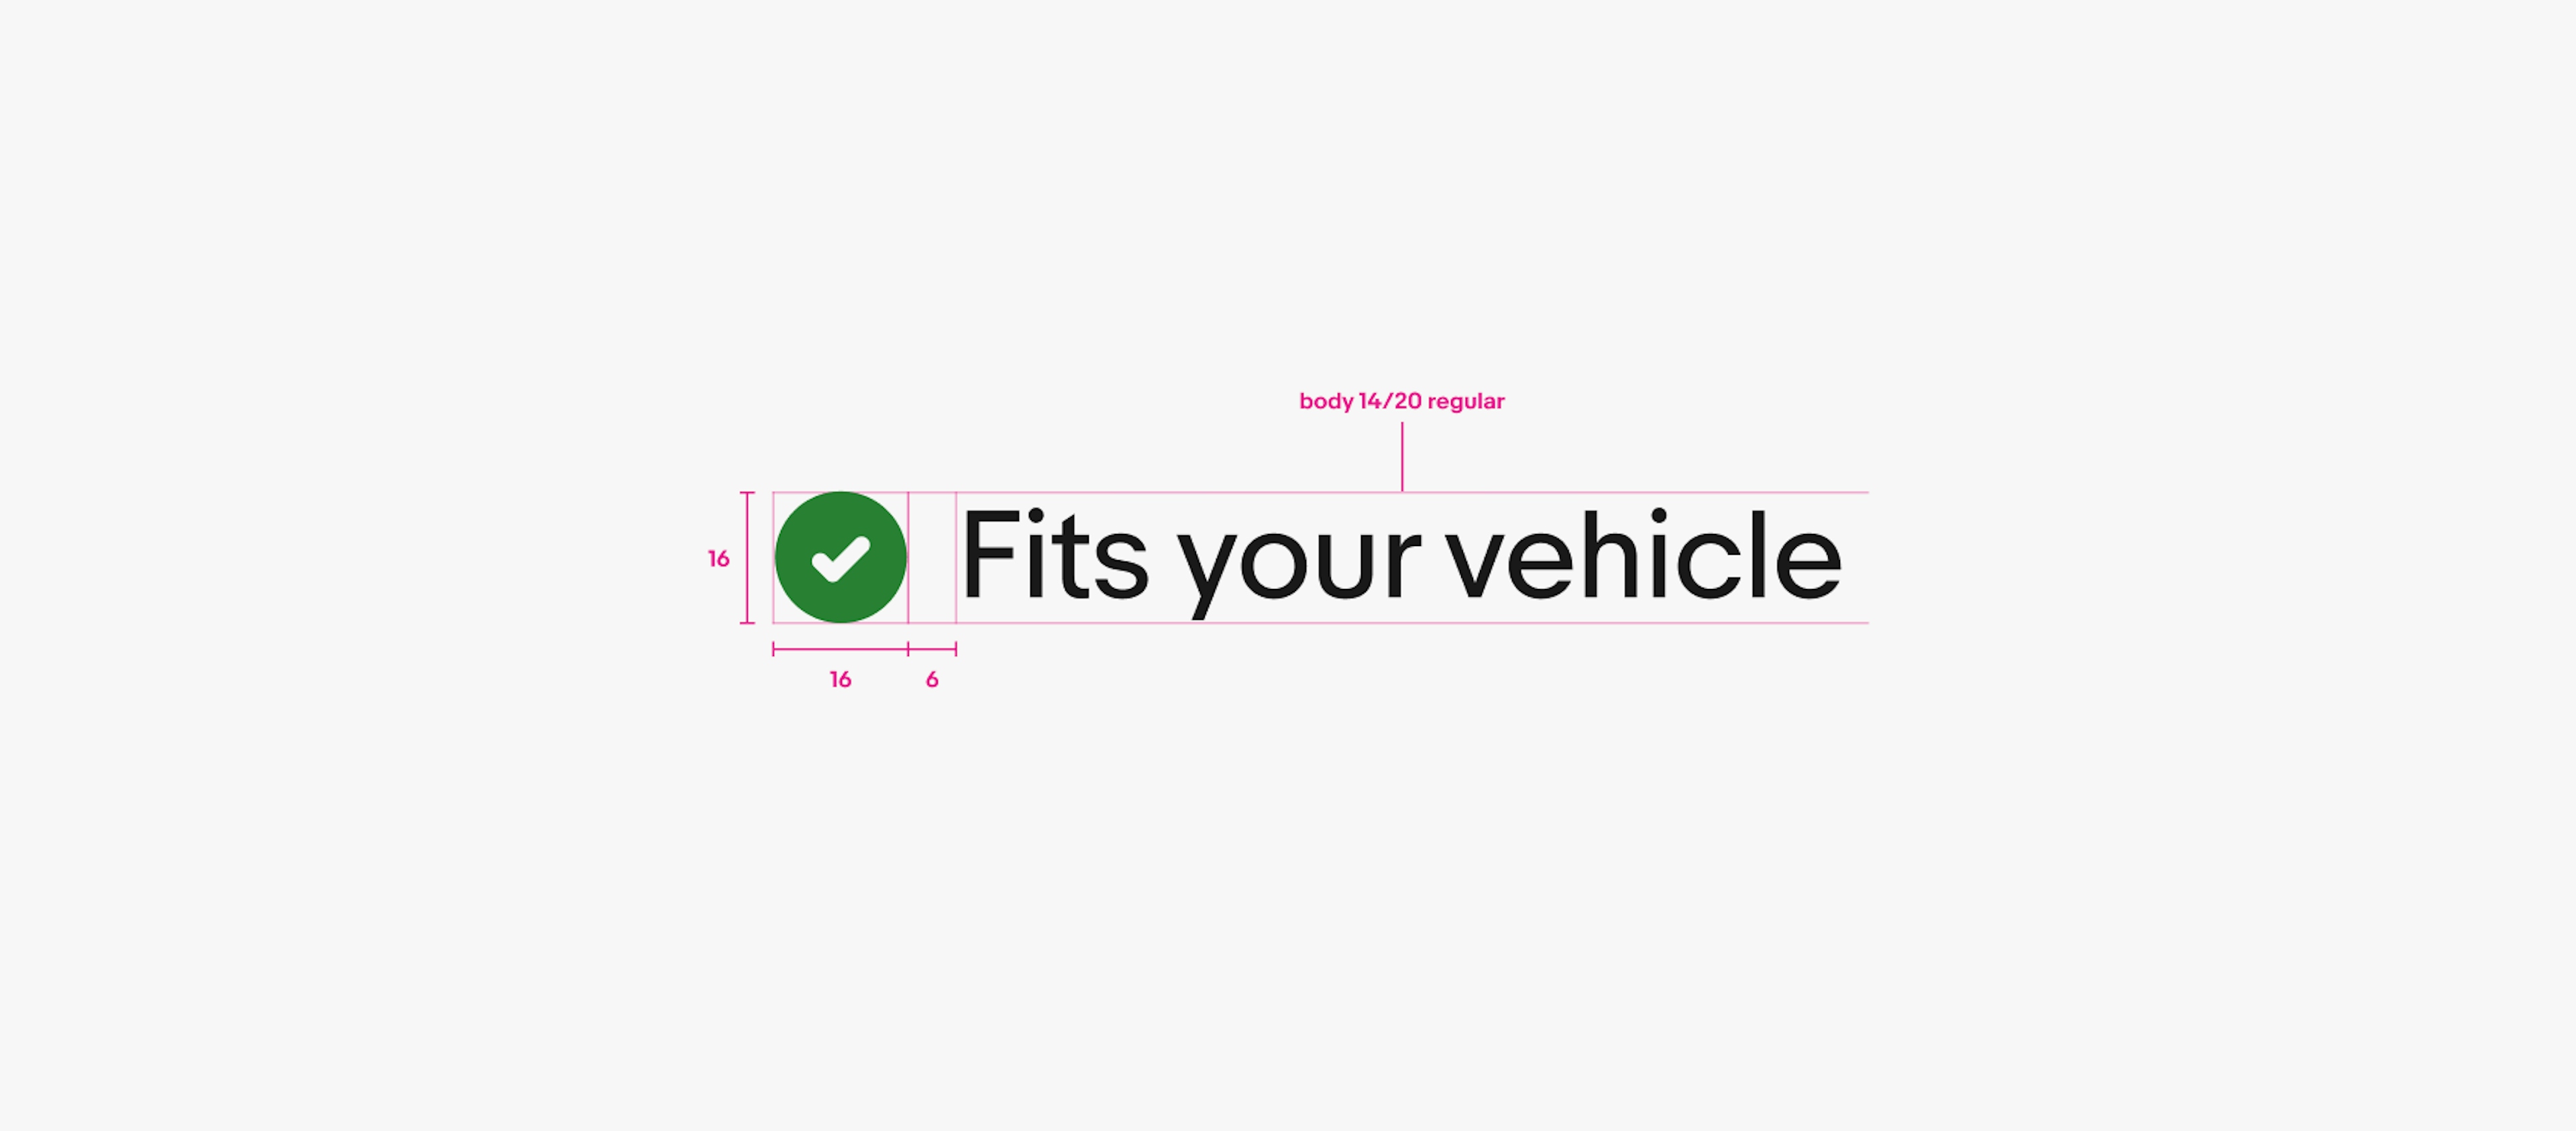 A detailed spec for a confirmation indicator combining icon and text. The green confirmation checkmark is 16px, followed by 6px of space, and then “Fits your vehicle” text using the Body - 14/20 regular type style.